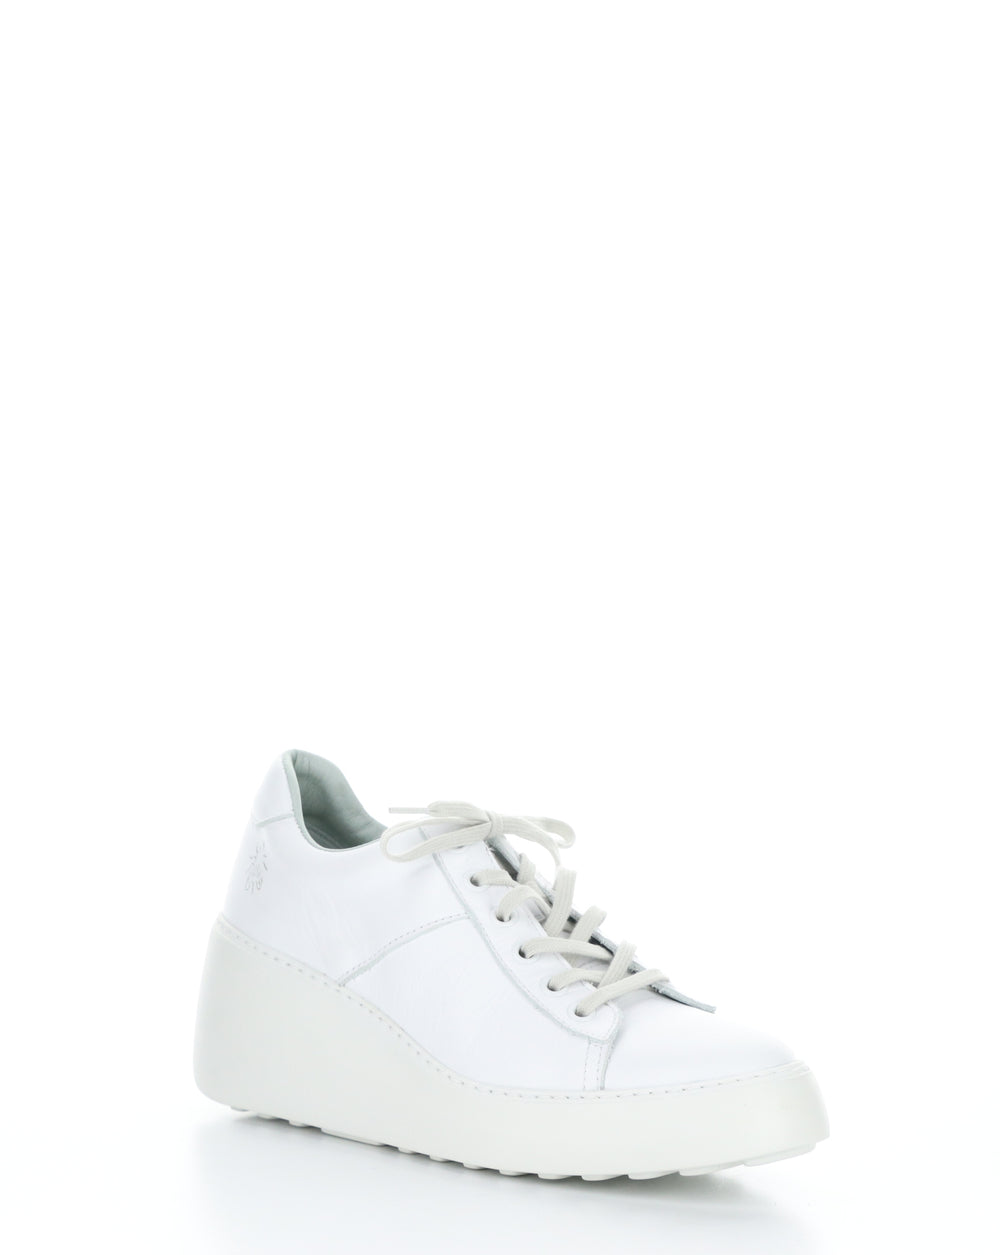 DELF580FLY 000 WHITE Lace-up Shoes